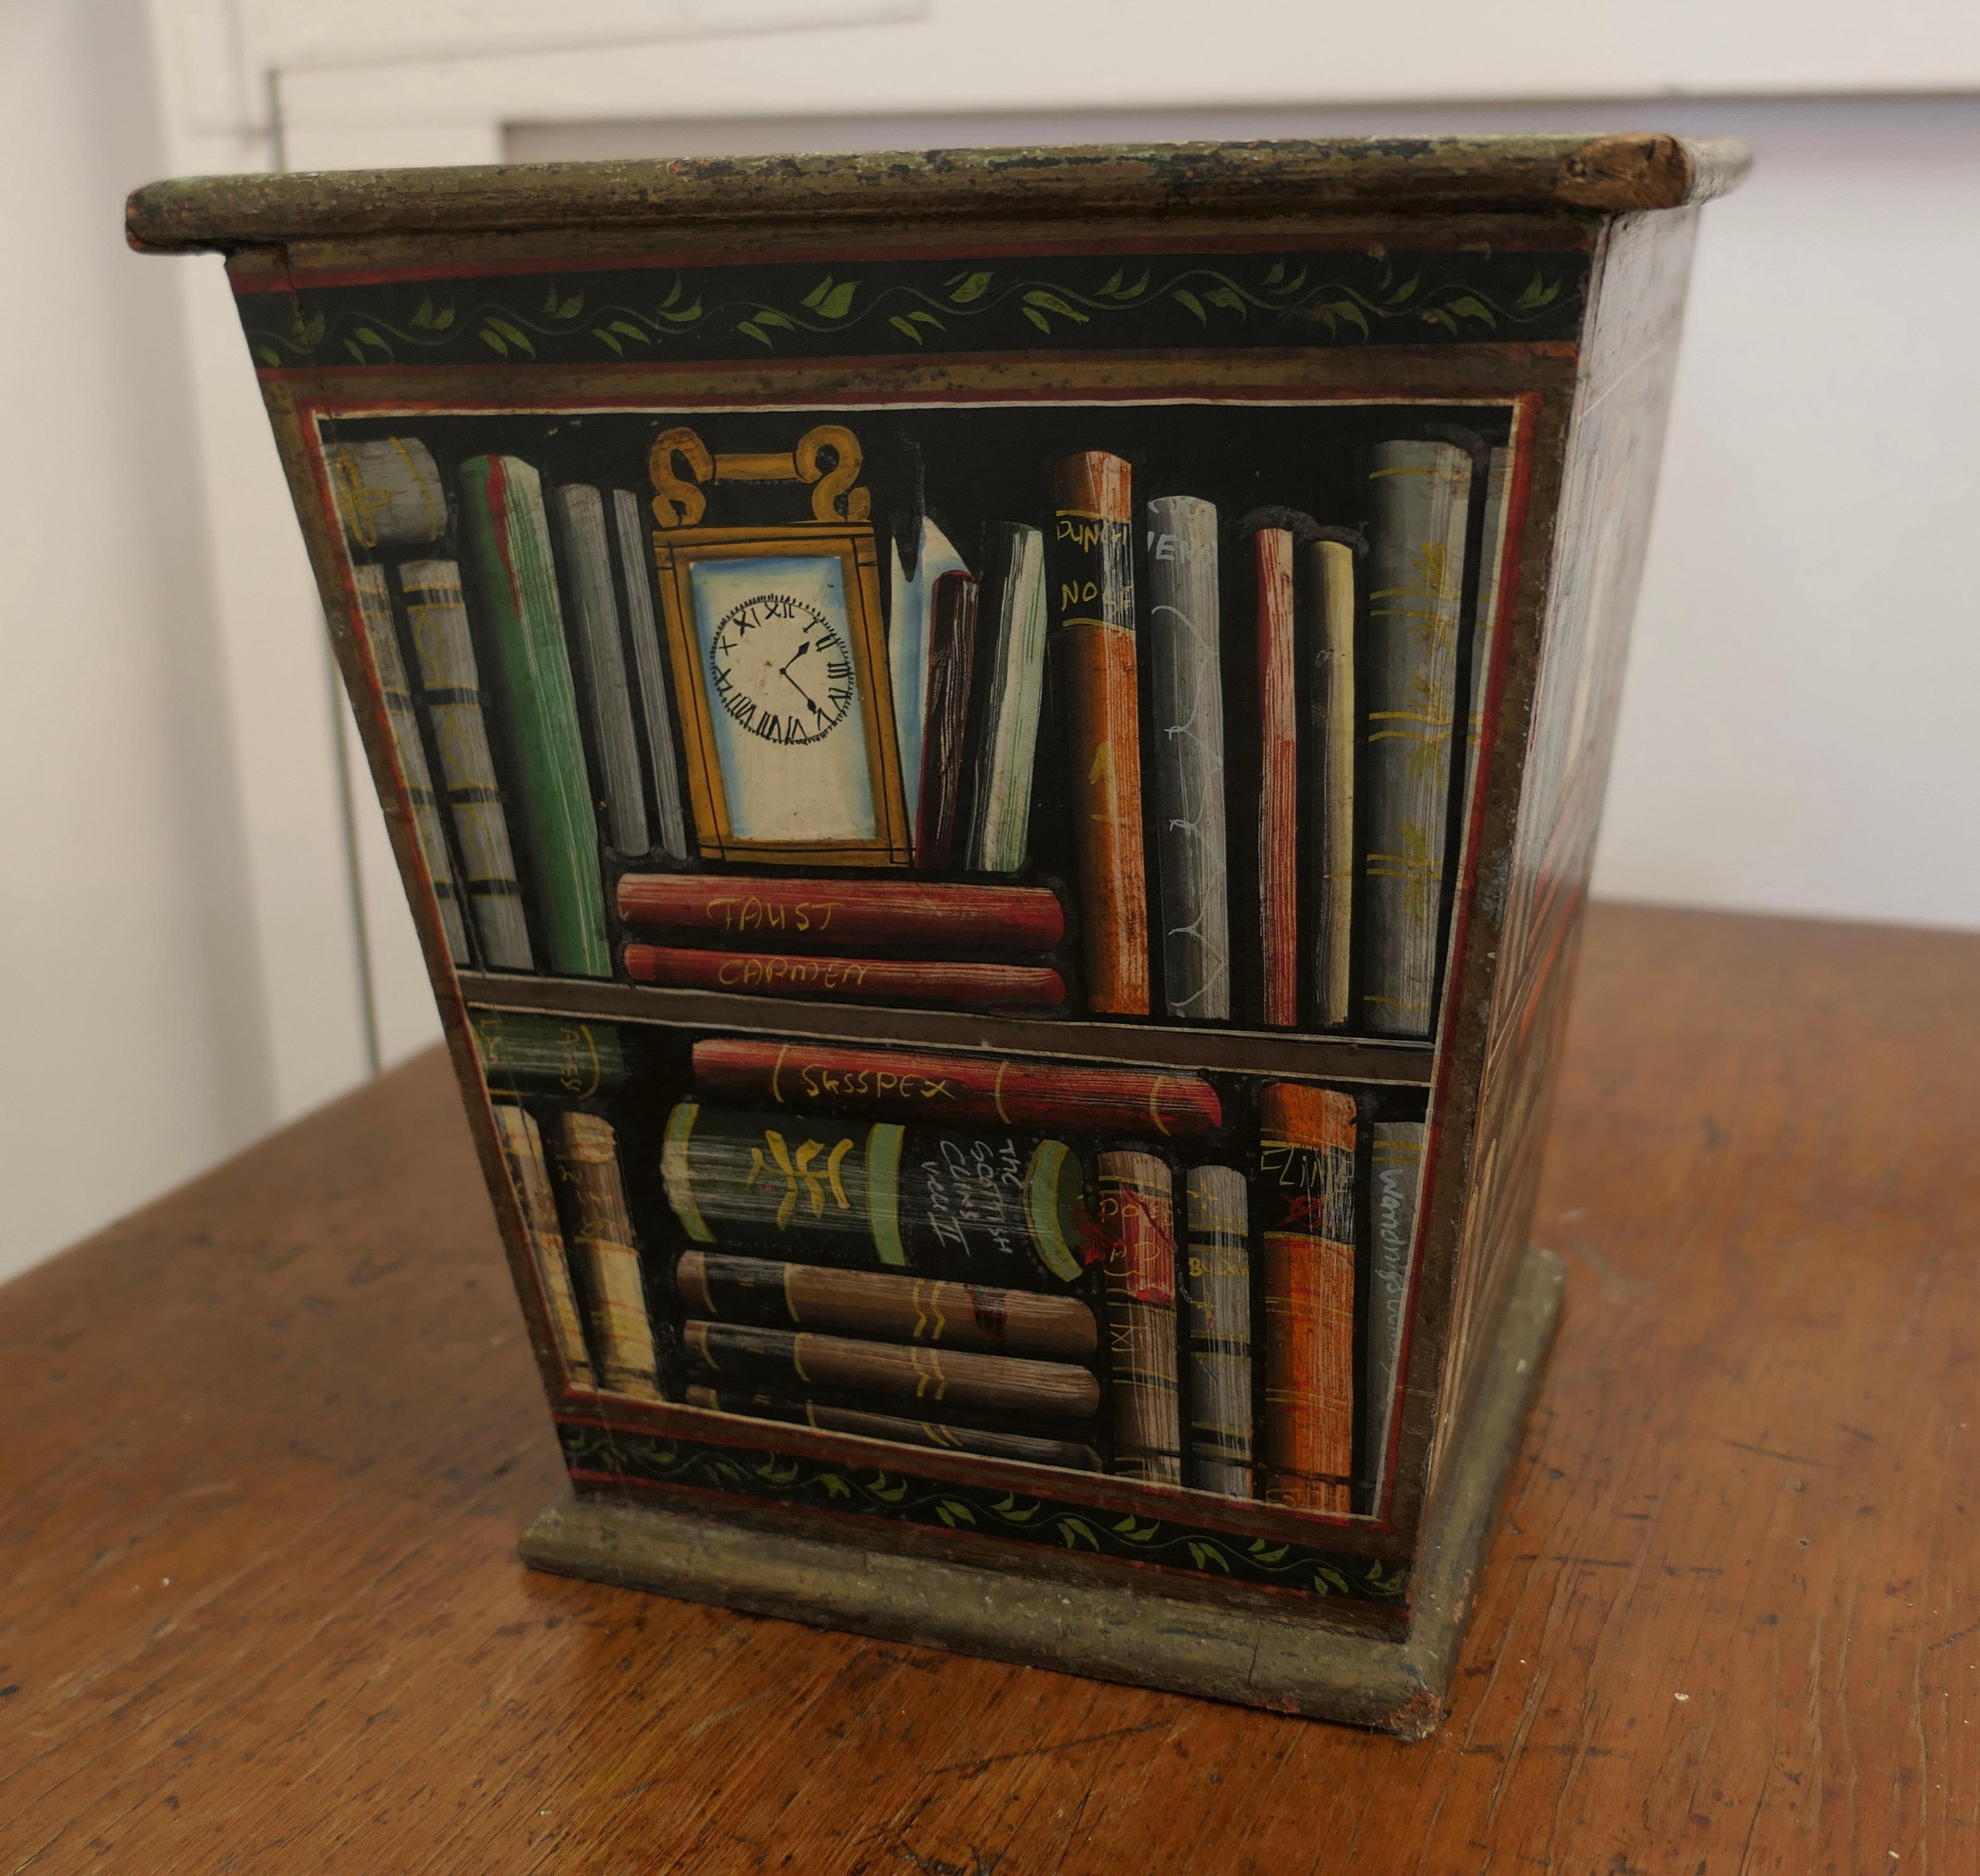 Vintage Novelty Waste Paper Basket

The container is made in wood with pictures of books and shelves on all 4 sides, a fun and a very attractive conversation piece

The container is 12” high and 10” across at the top
TMS184.